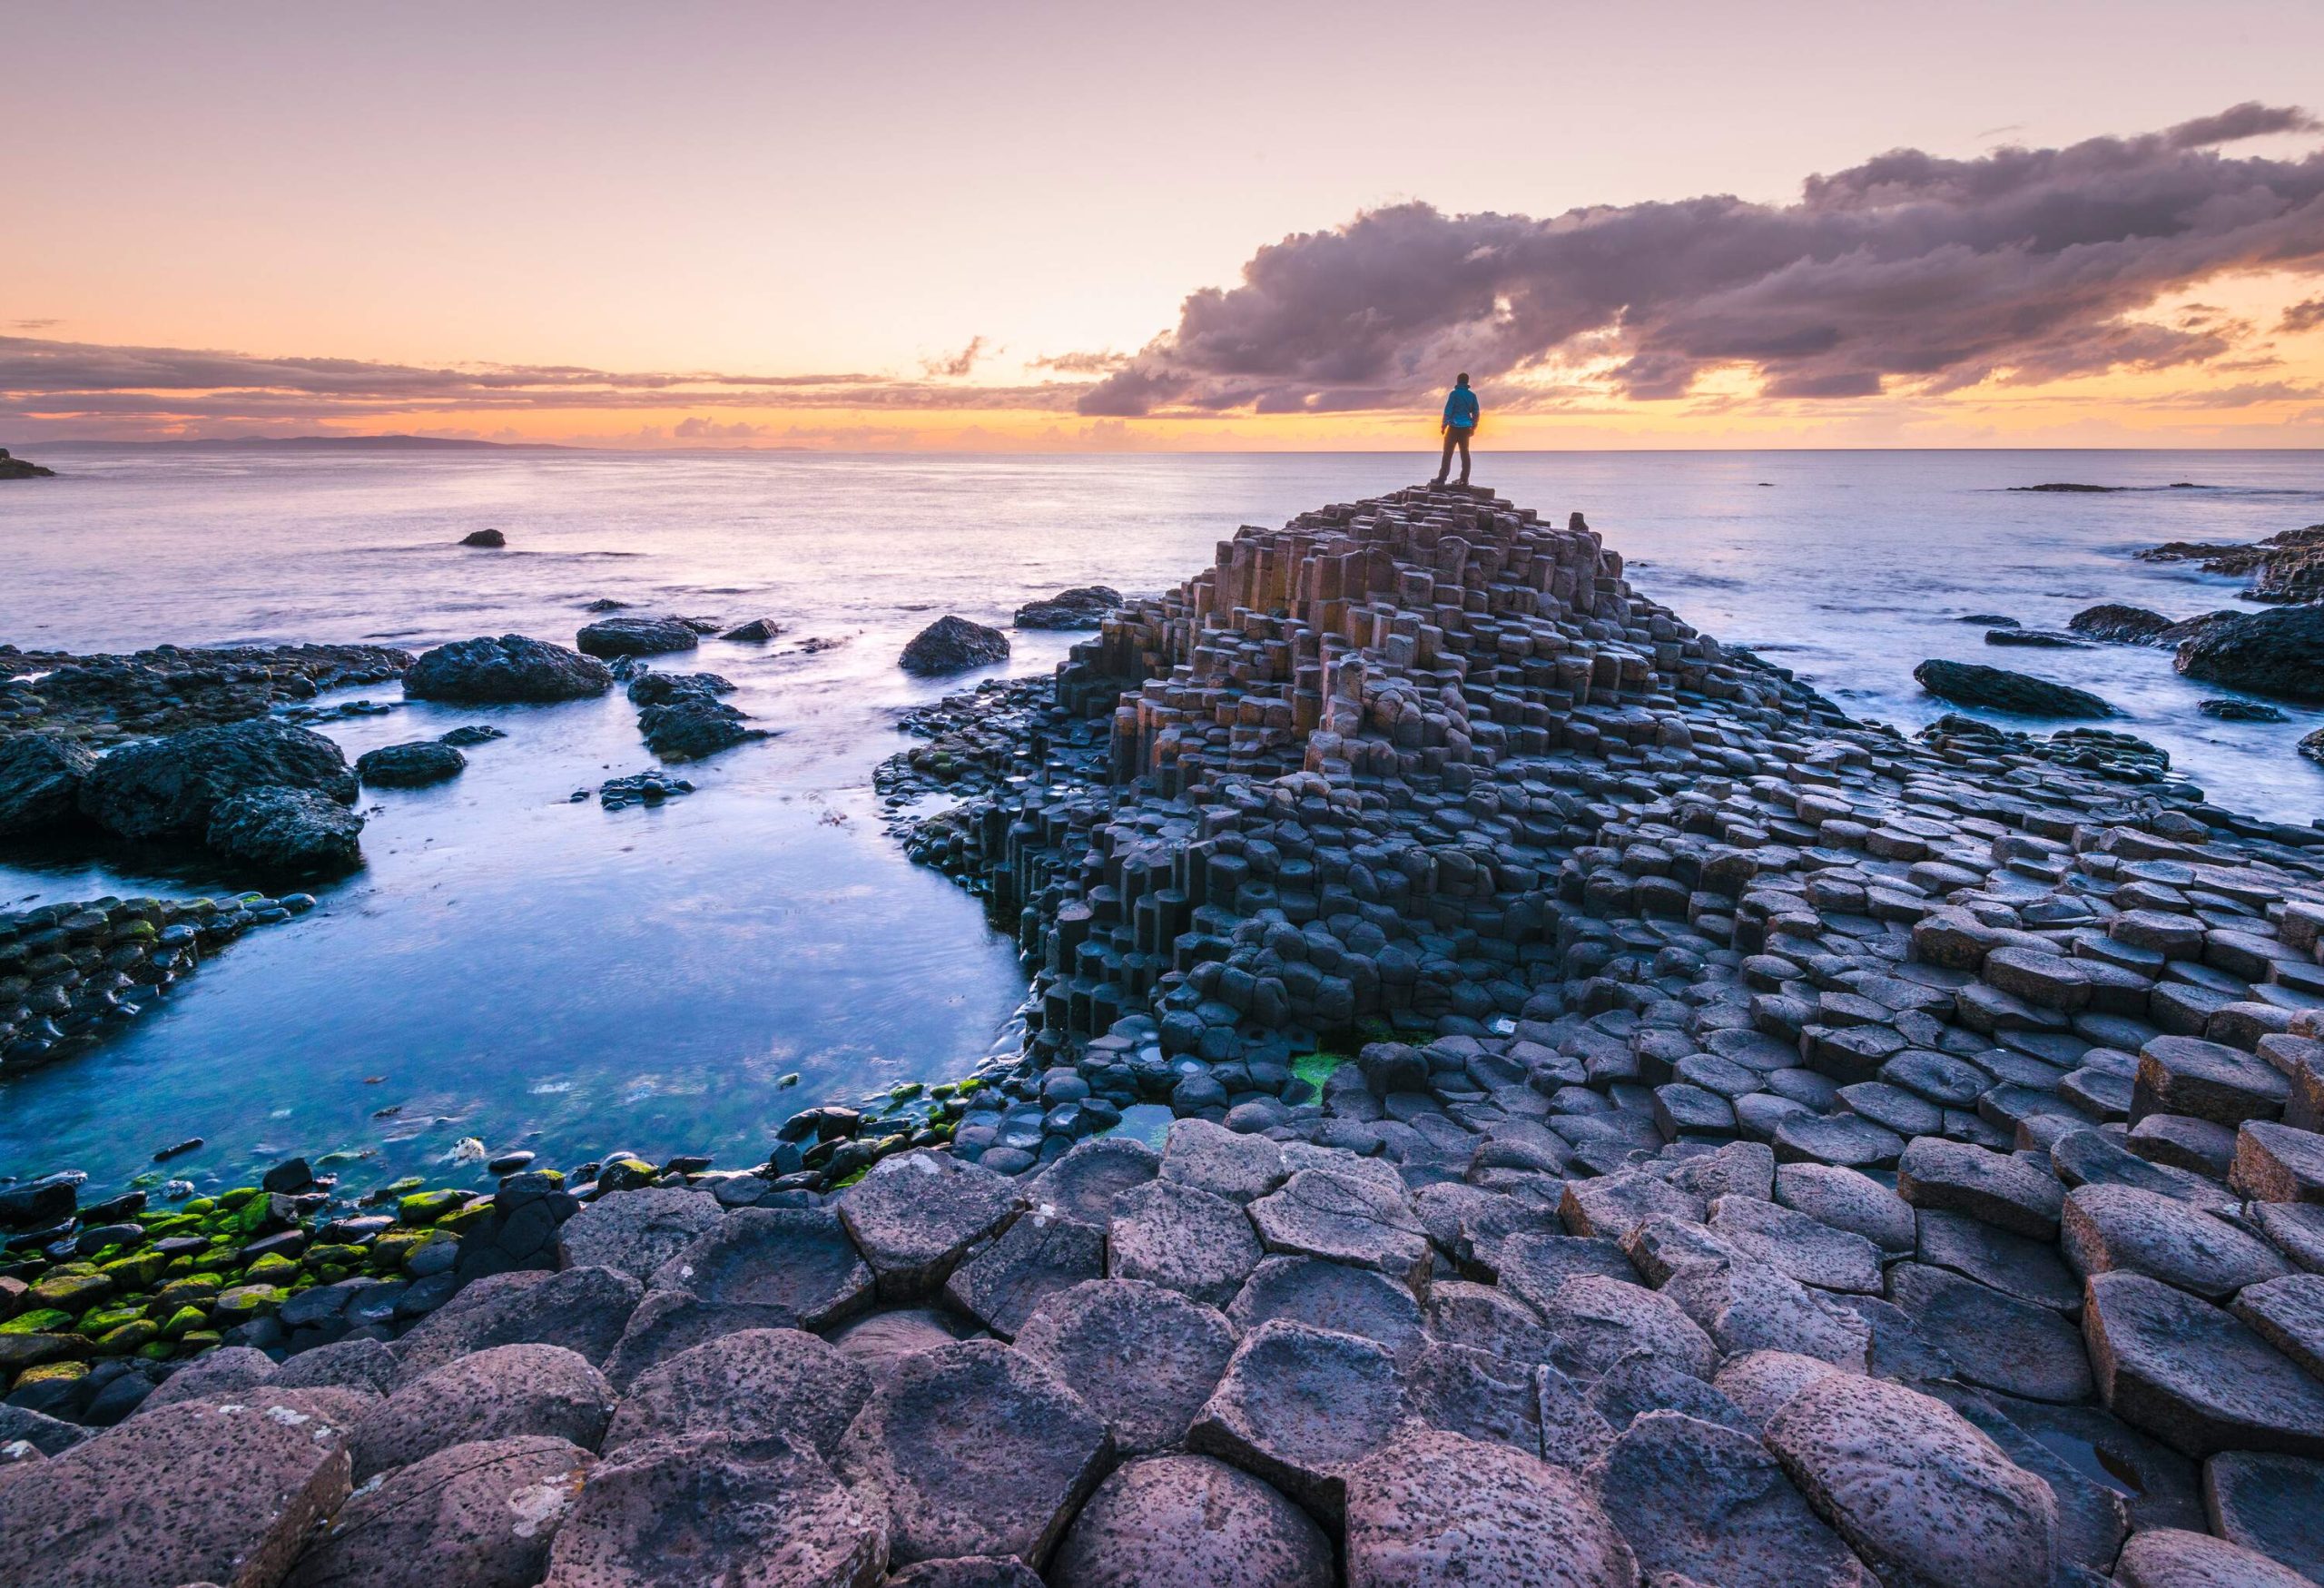 A person standing on the edge of an iconic landform featuring majestic basalt columns rising from the sea against the backdrop of a scenic twilight sky.